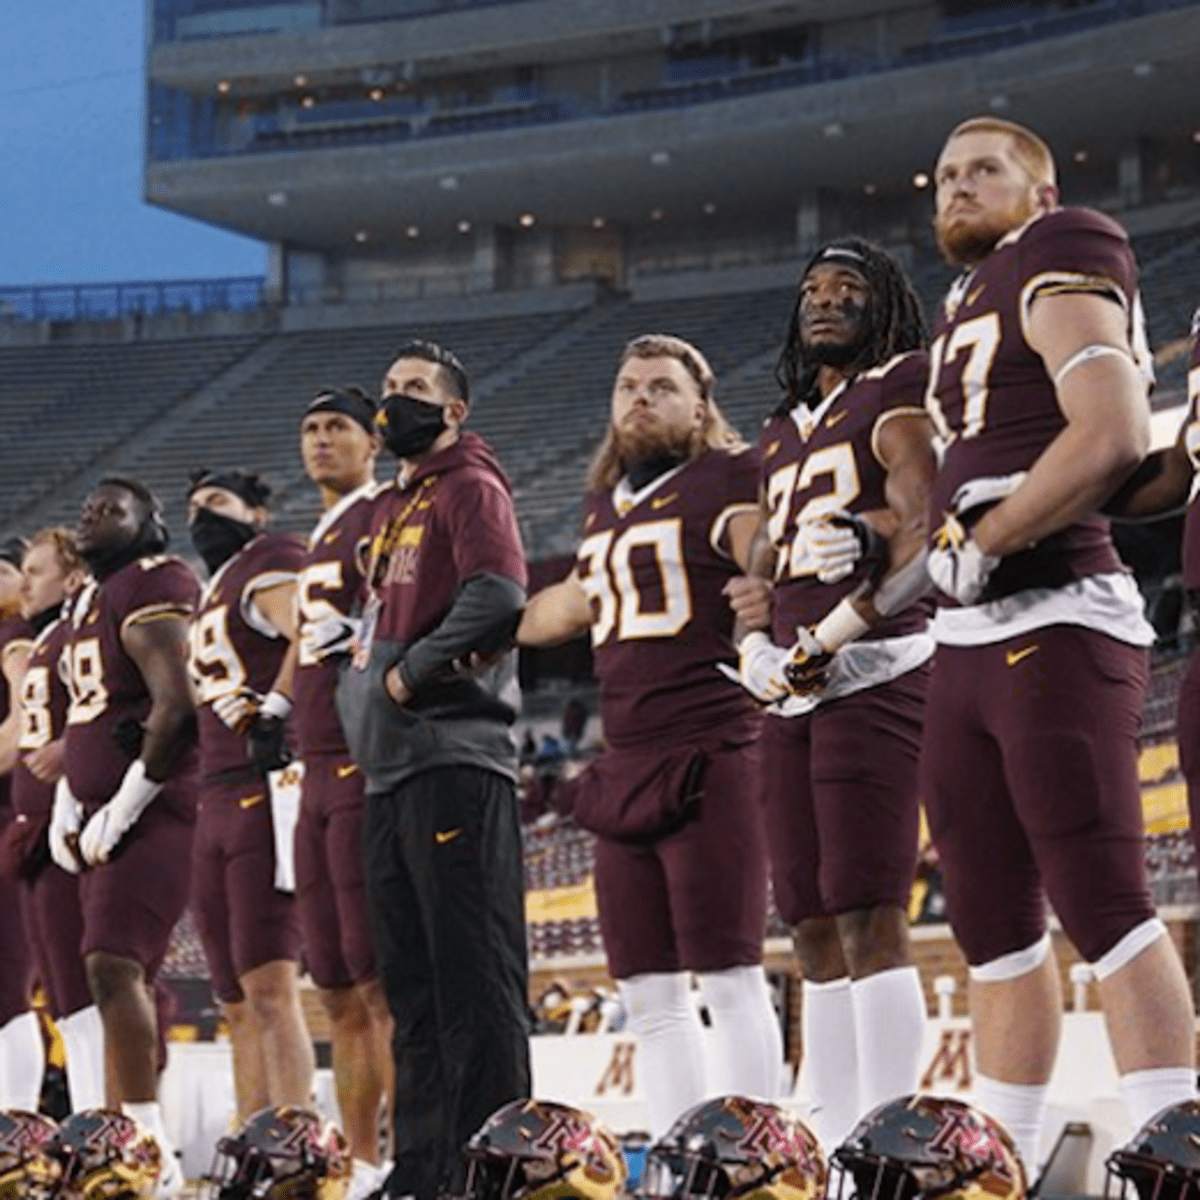 Mn Gophers Football Schedule 2022 Gopher Football's Game Vs. Iowa Moved In Modified 2022 Schedule - Bring Me  The News